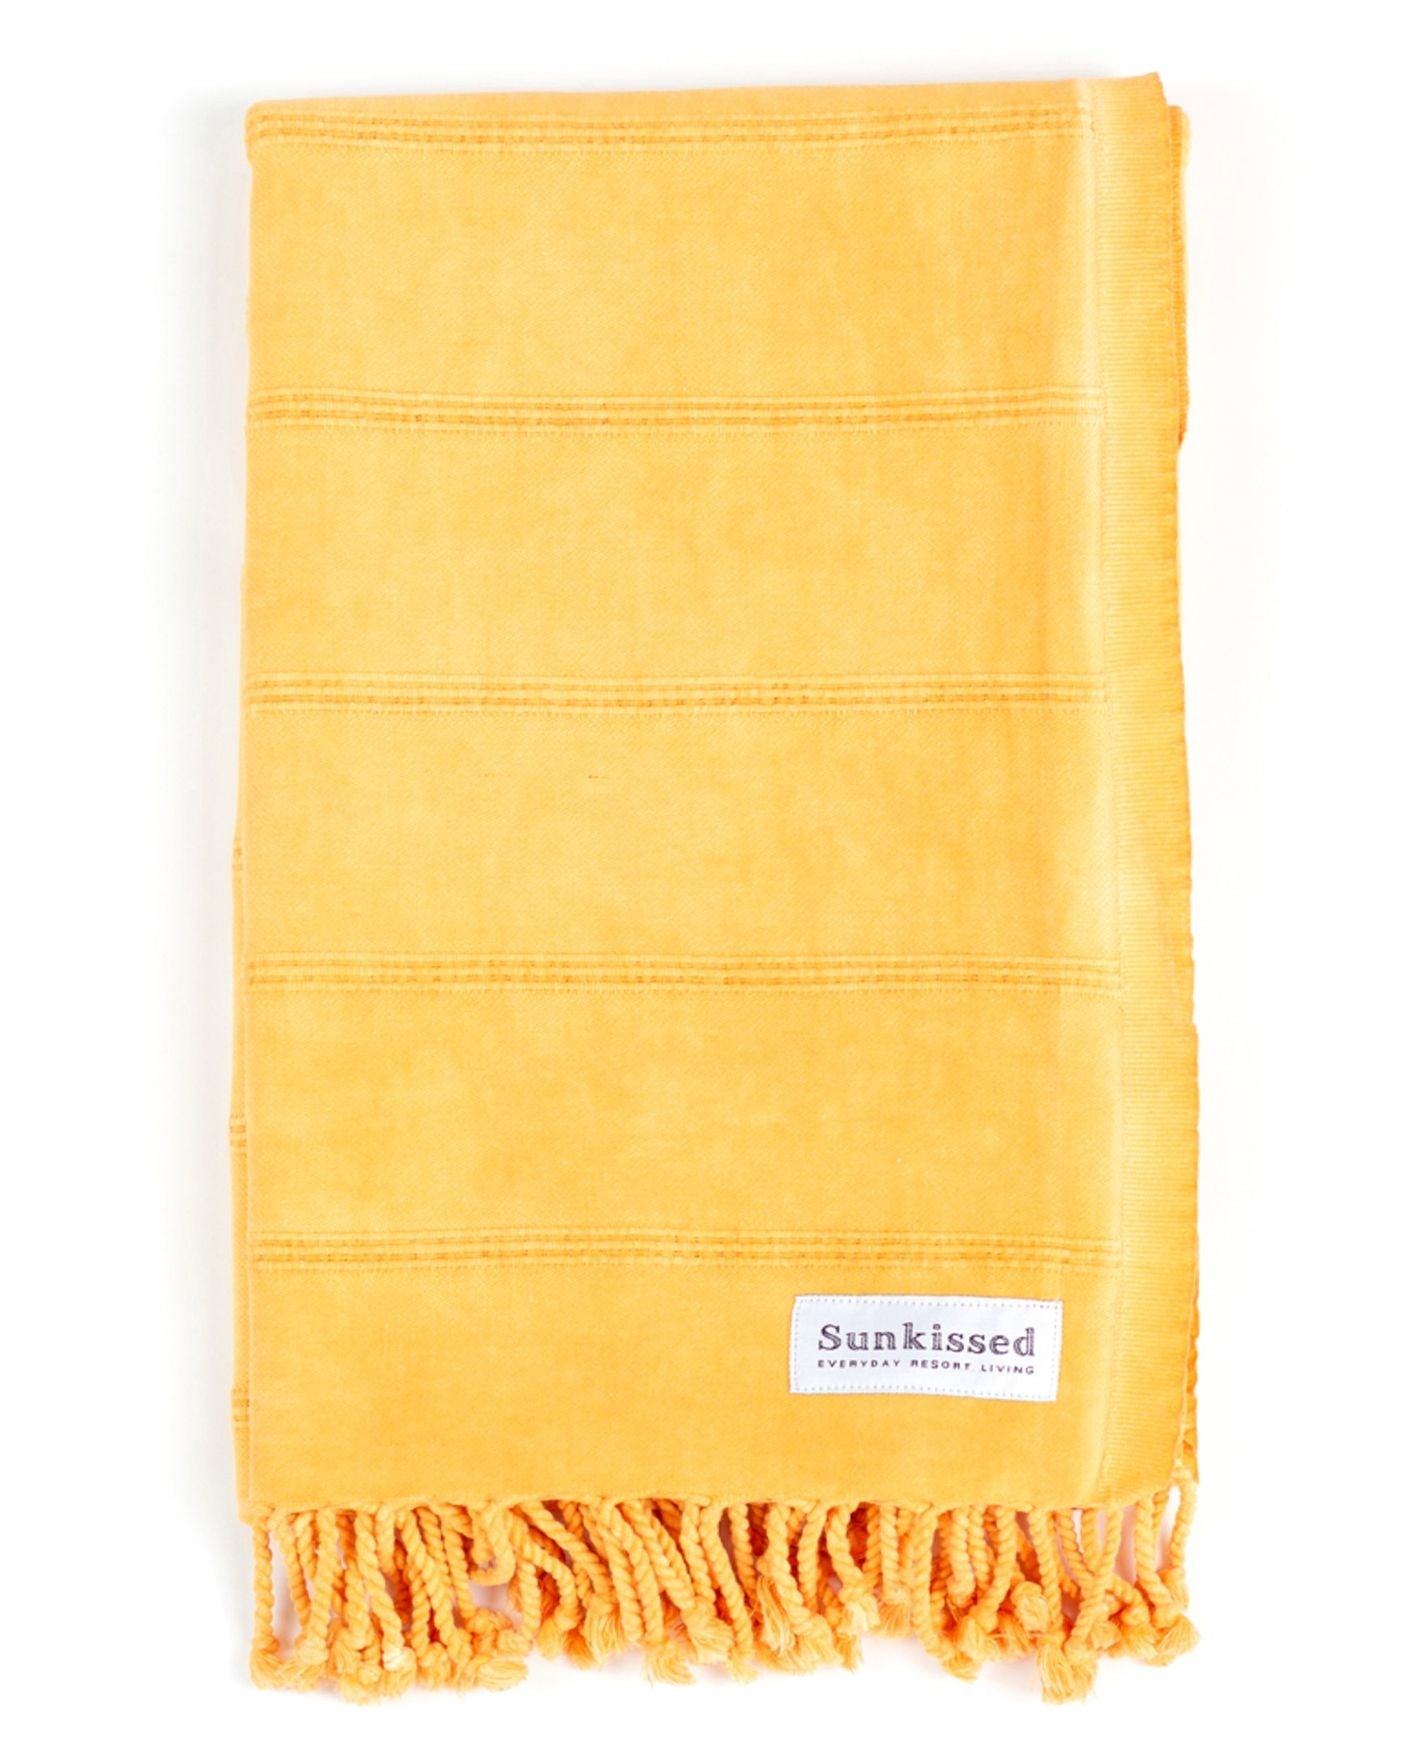  Tuscany • Sand Free Beach Towel by Sunkissed Sunkissed Perfumarie